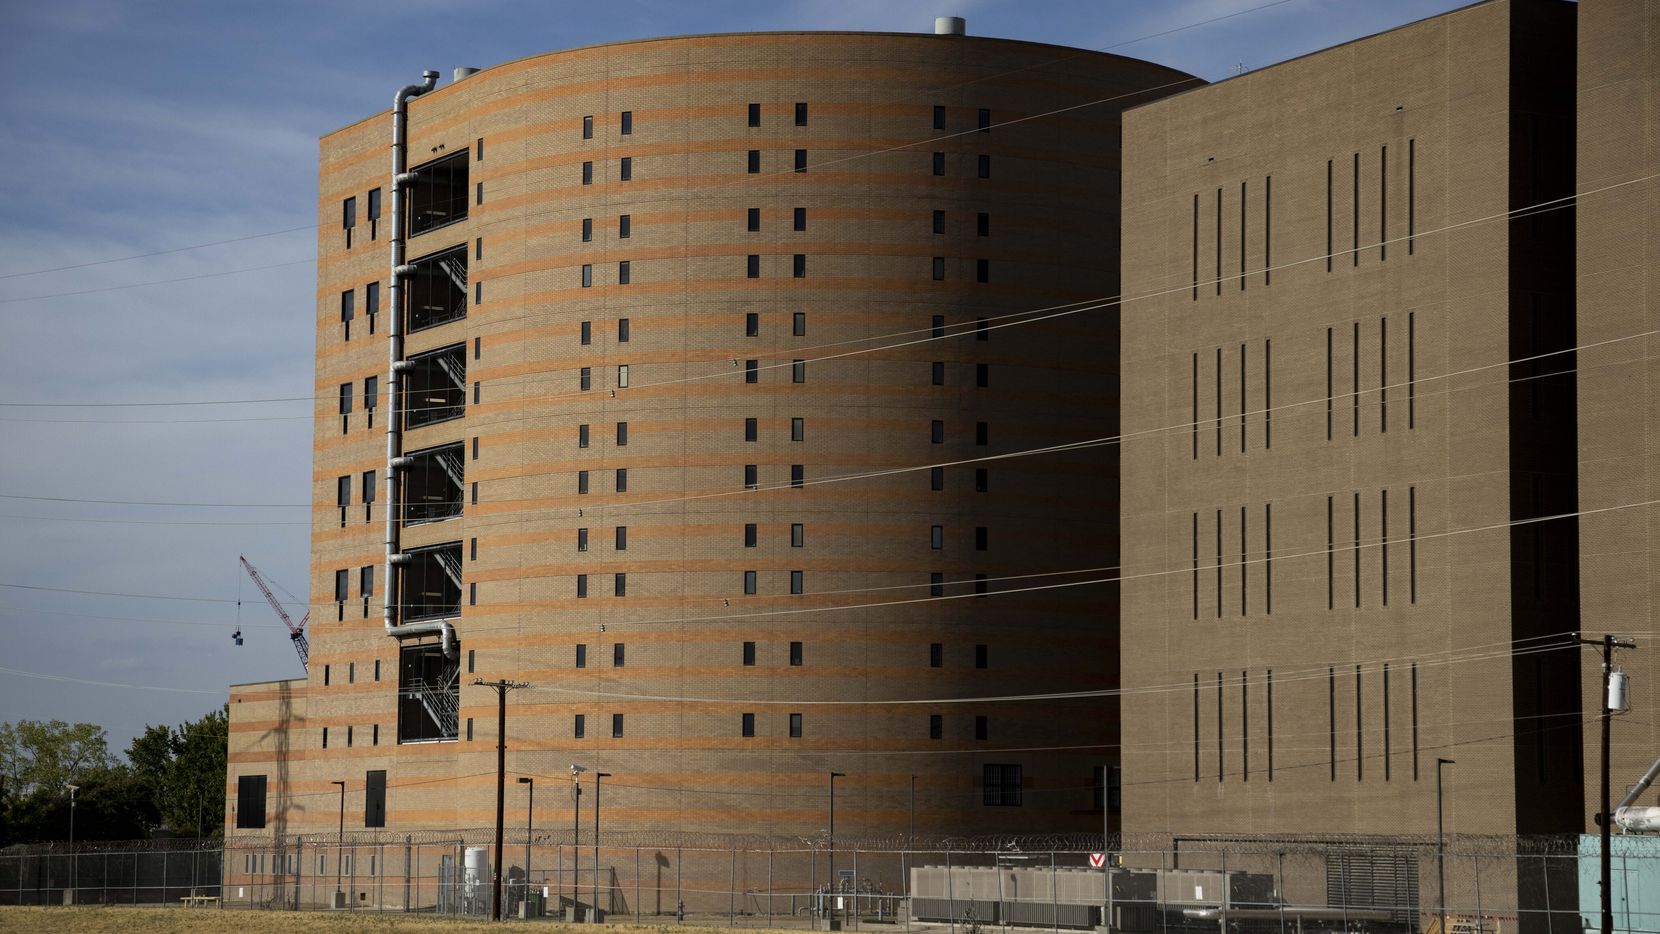 The North Tower Detention Facility (left) as part of the Lew Sterrett Justice Center...